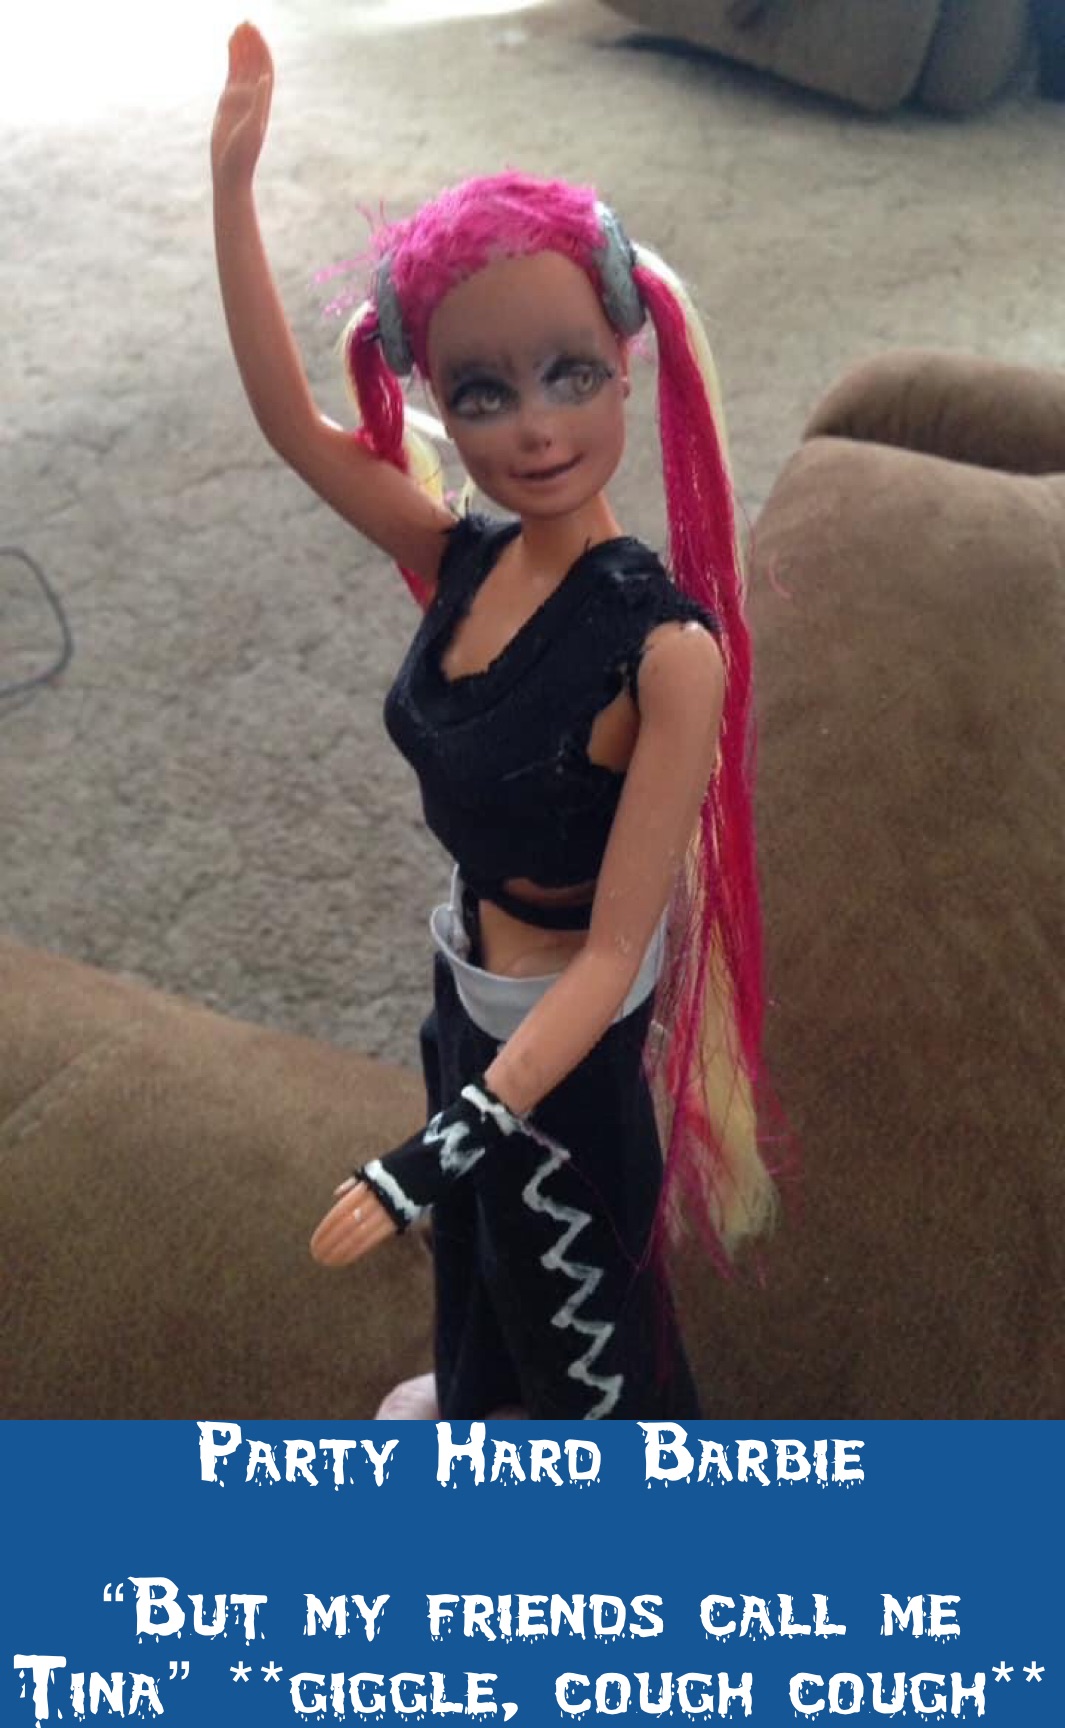 Party Hard Barbie

“But my friends call me Tina” **giggle, cough cough**